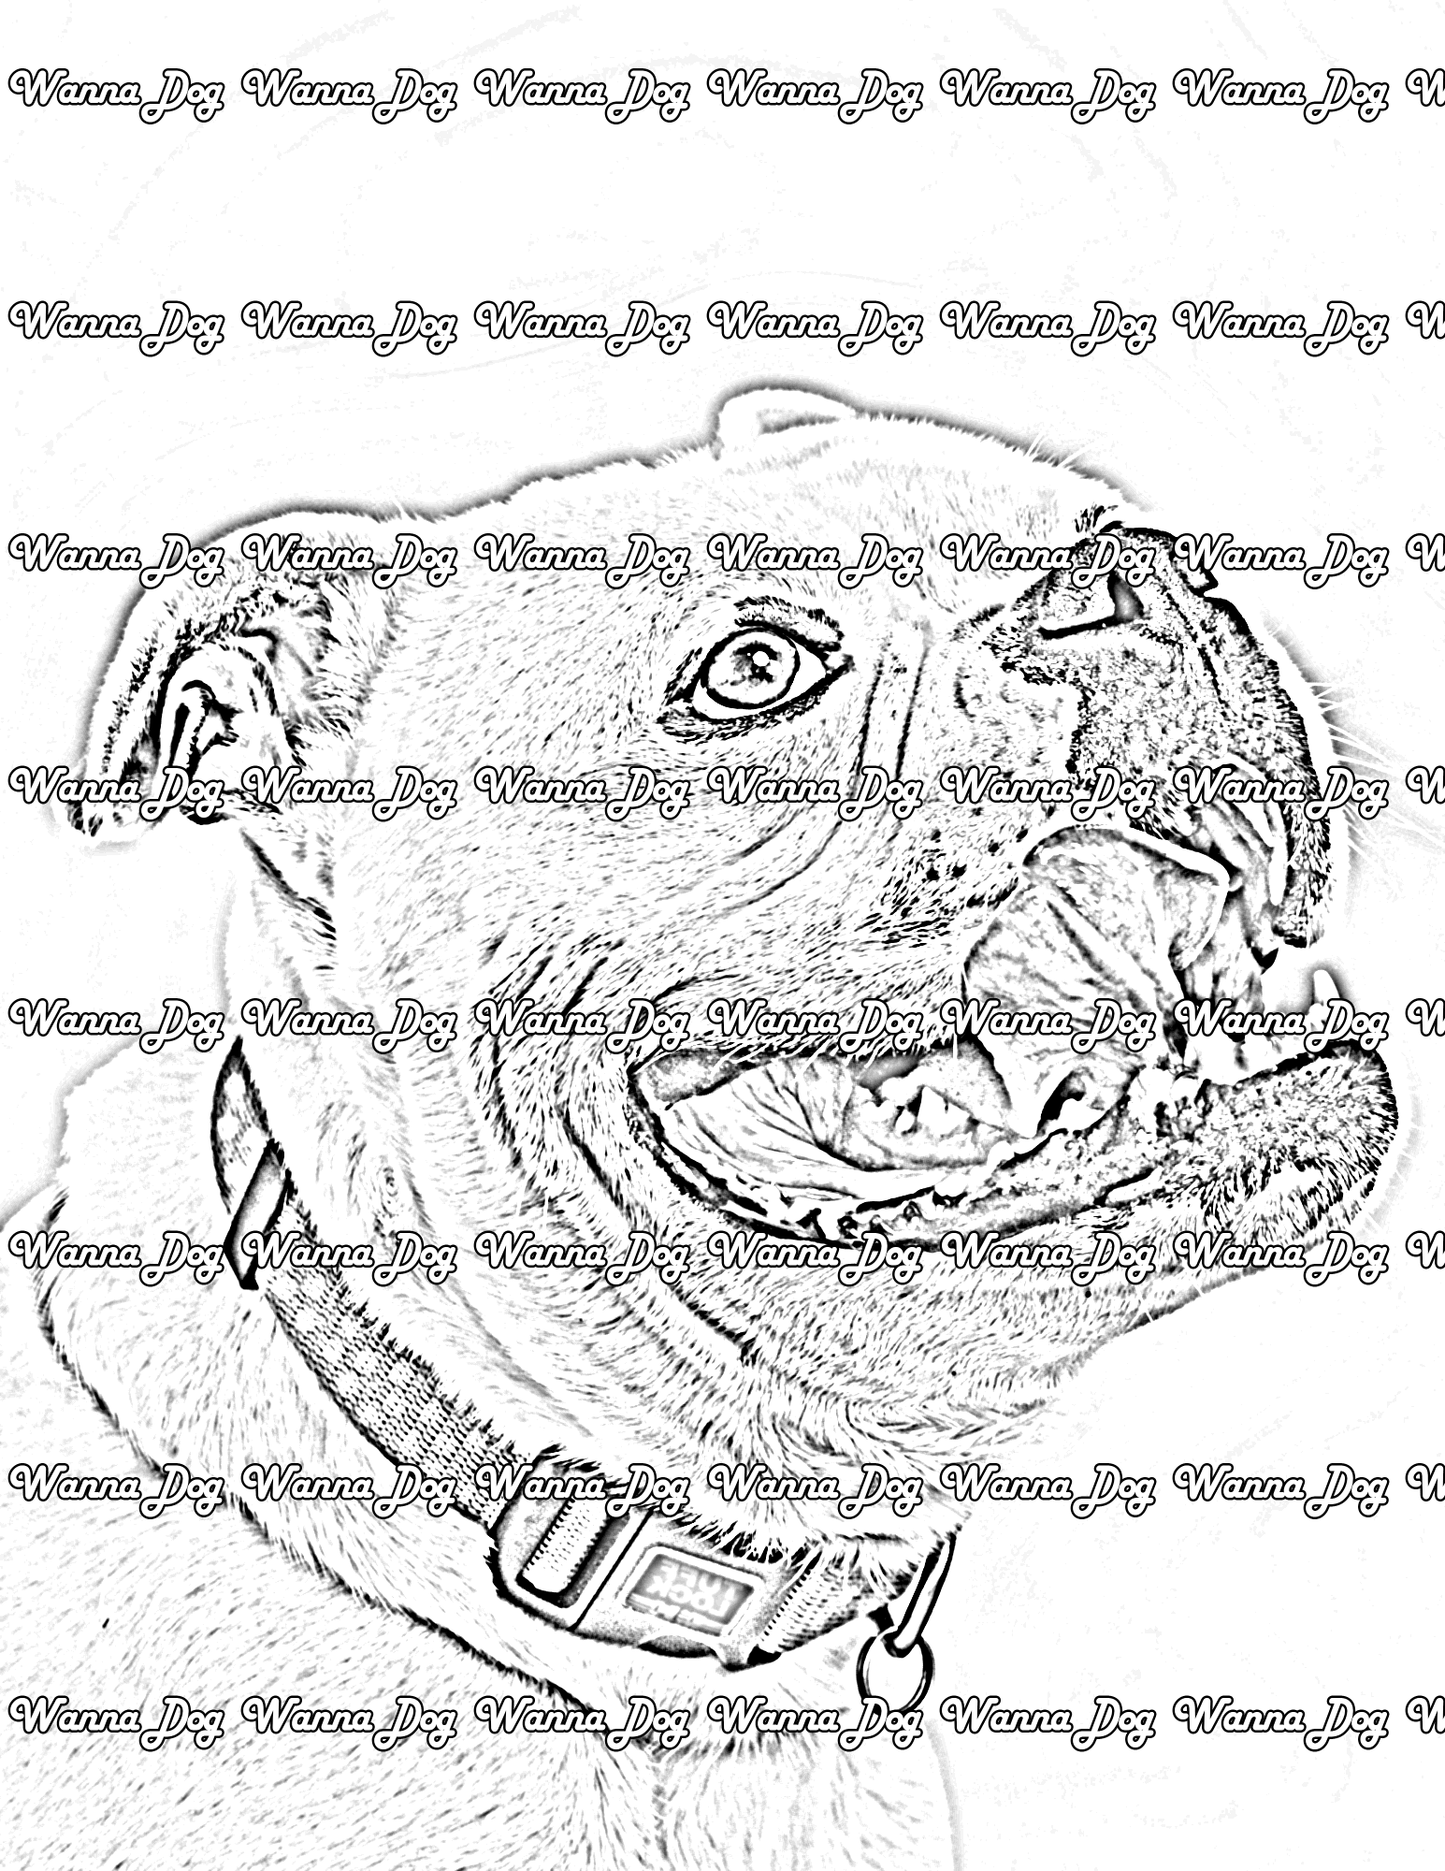 American Bulldog Coloring Page of a American Bulldog close up with their tongue out